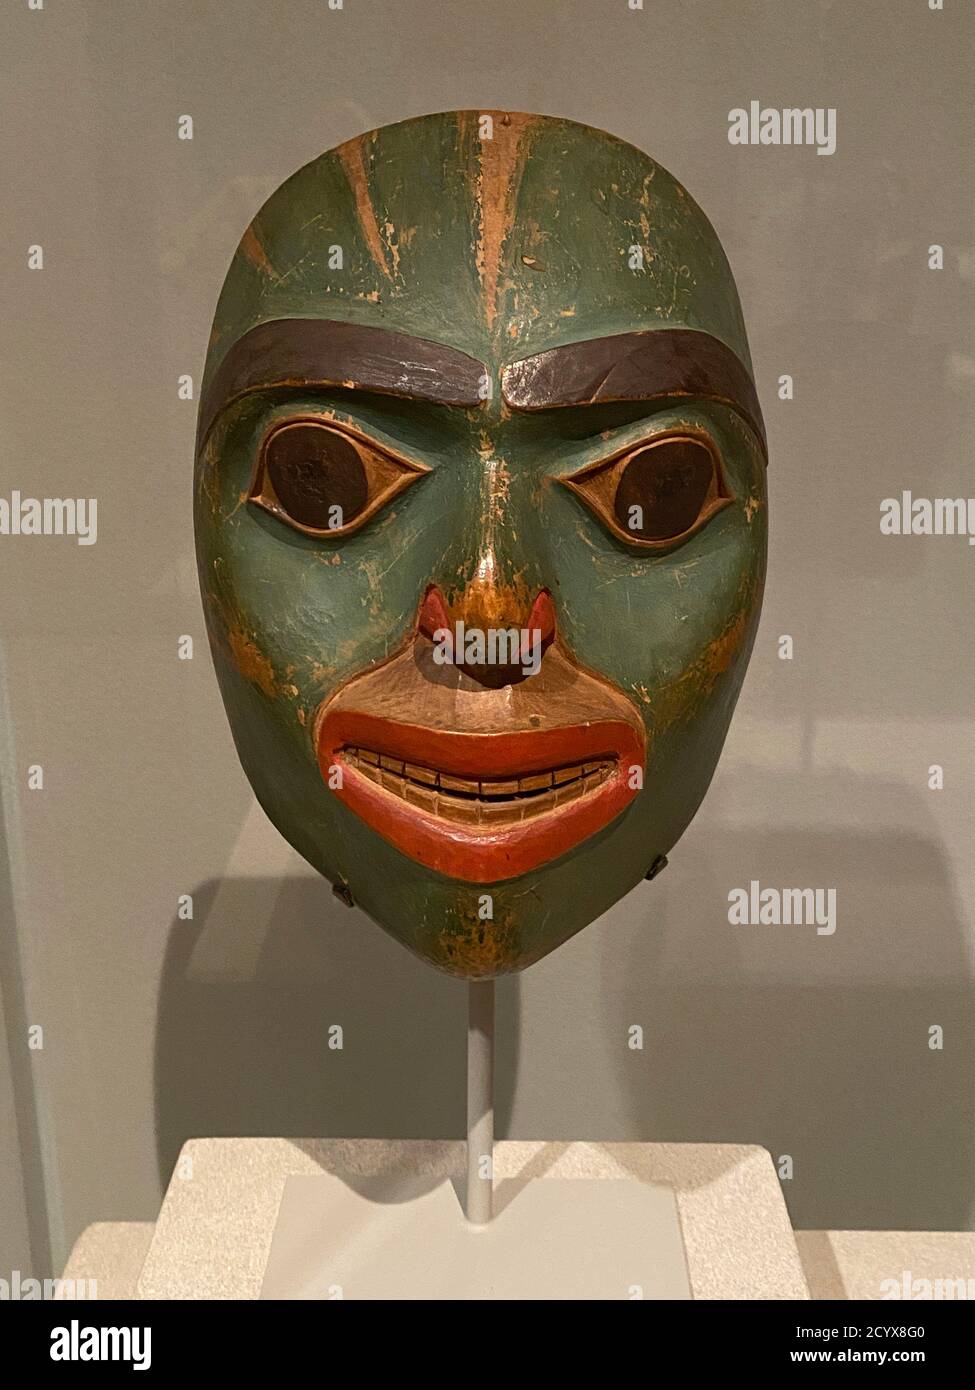 Mask; attributed to Taaw'yaat (Tlingit, 1812-1880, Alaska ca.1860, wood & pigment.  A revered ancestor is portrayed in this mask, made to be worn during dramatic reenactments of clan history. Stock Photo